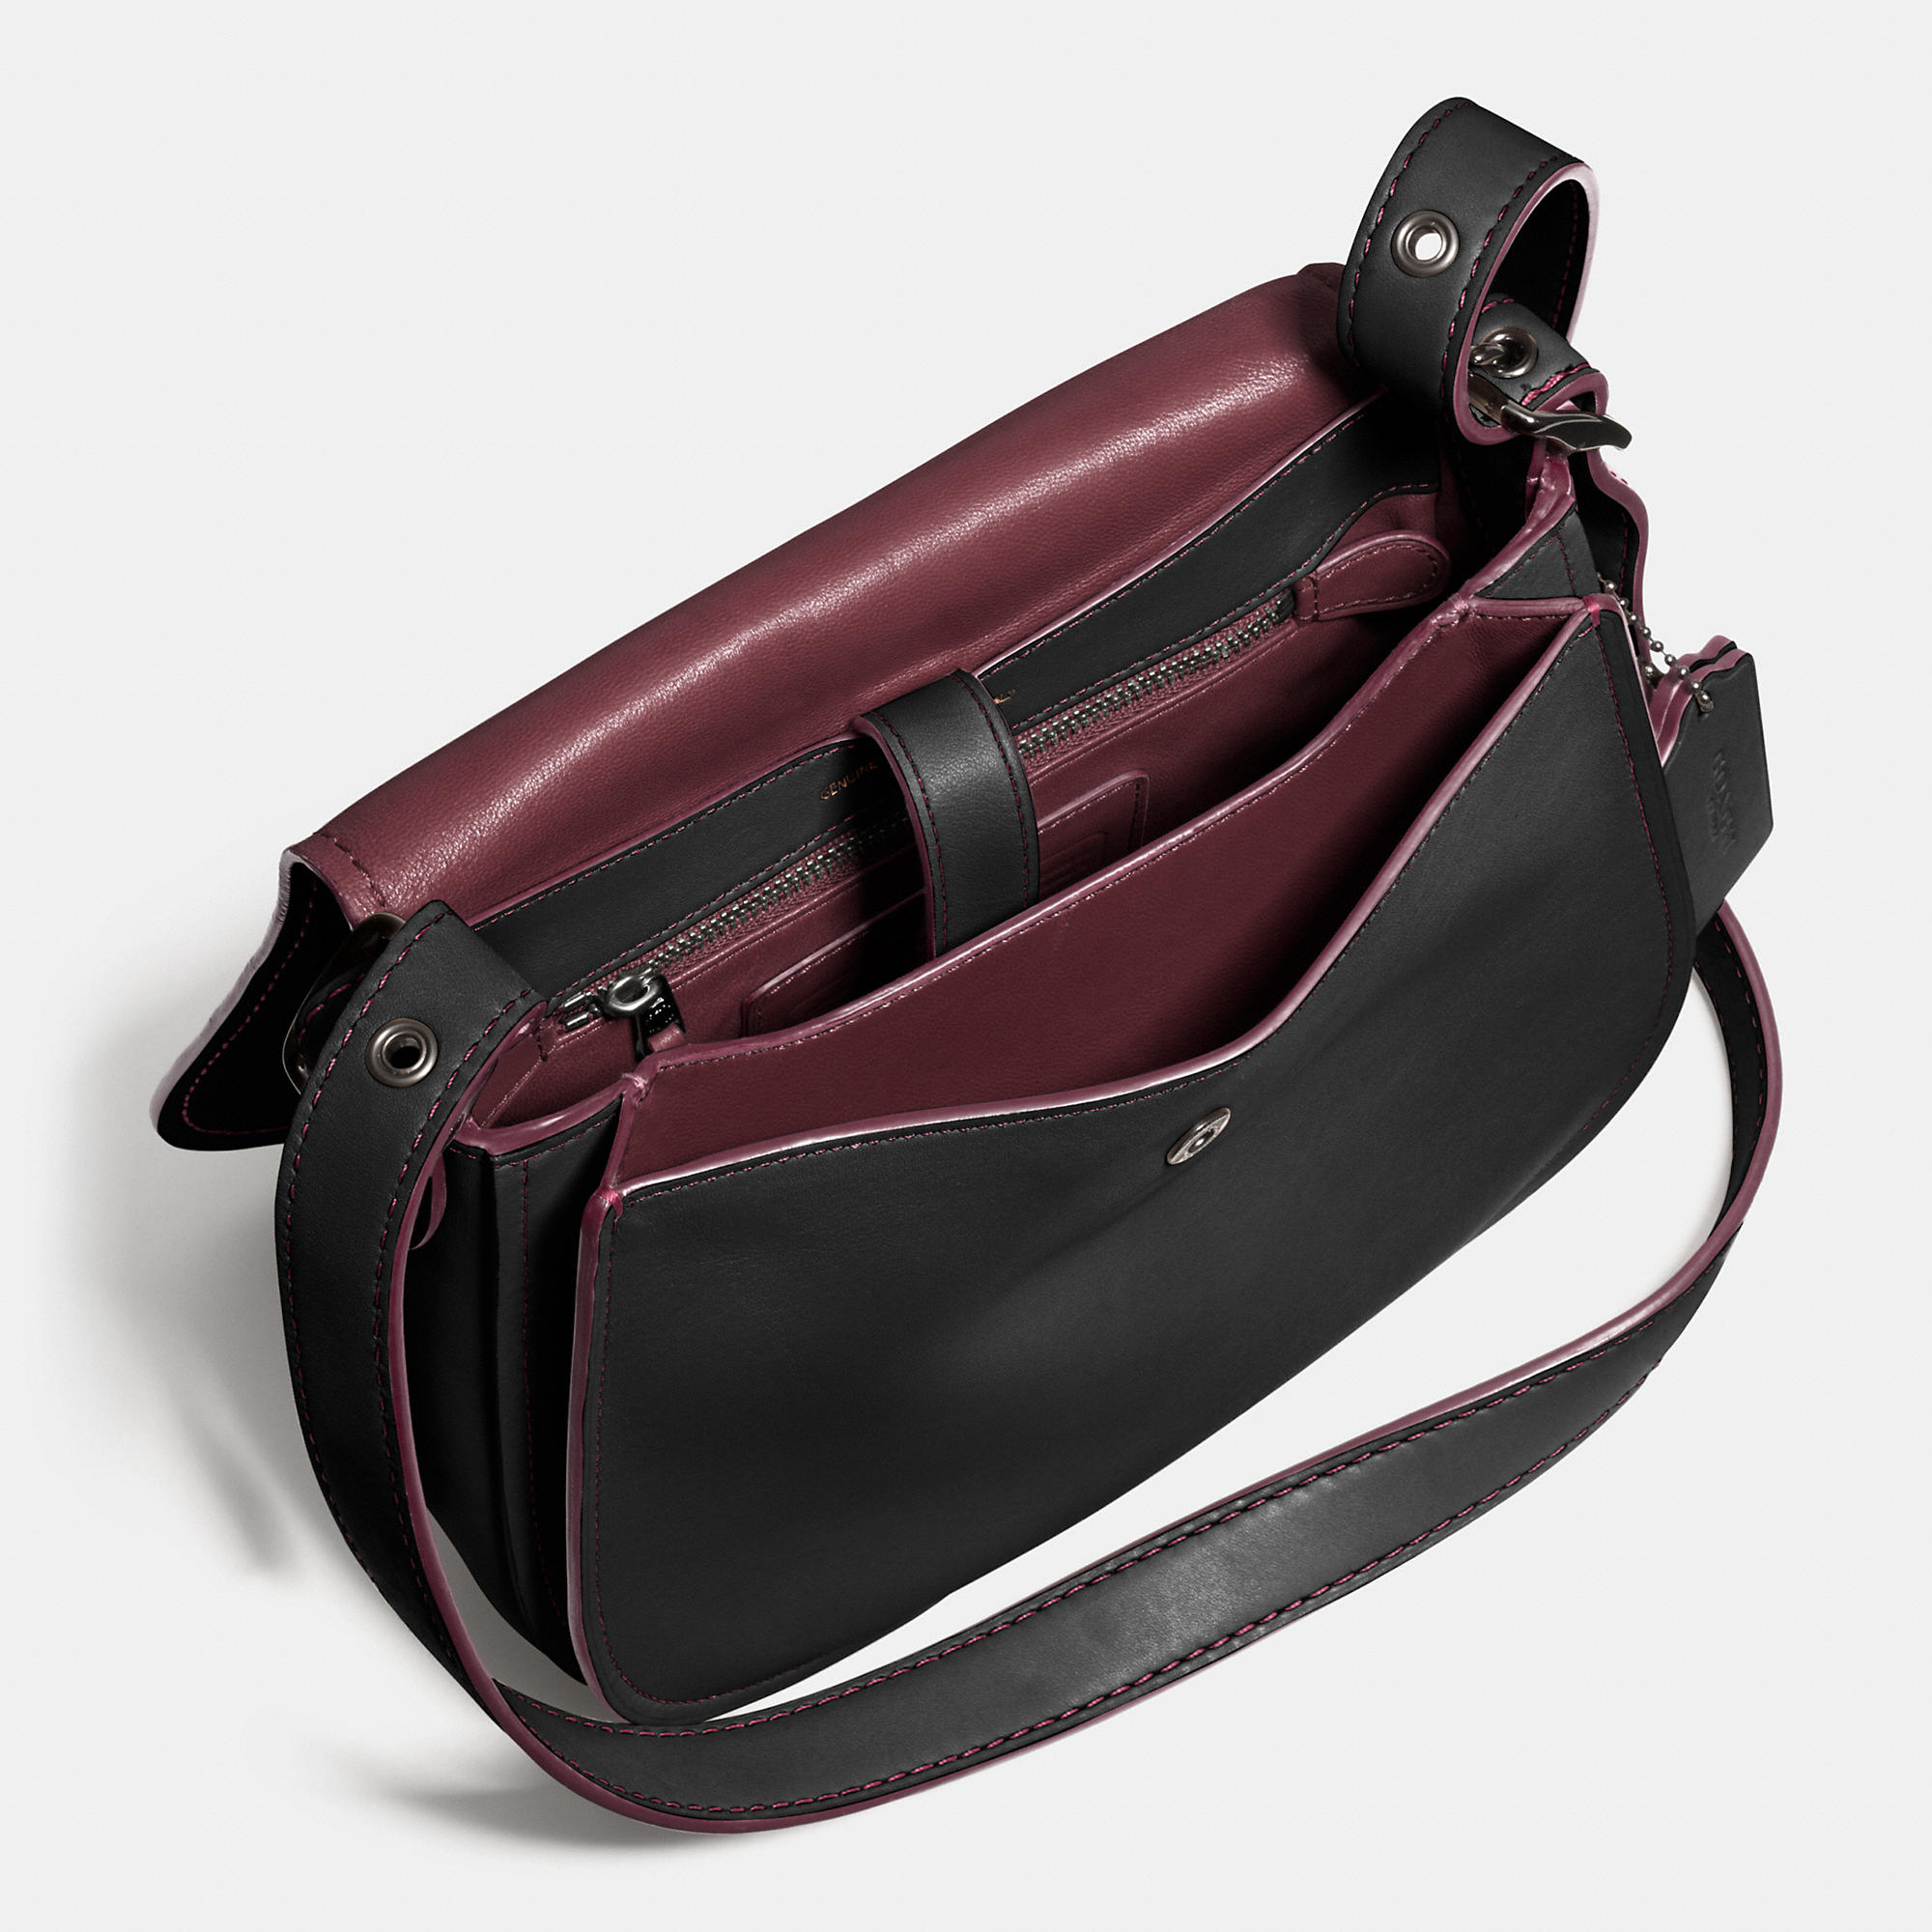 Top-Handle Bags Coach Saddle Bag 23 In Glovetanned Leather